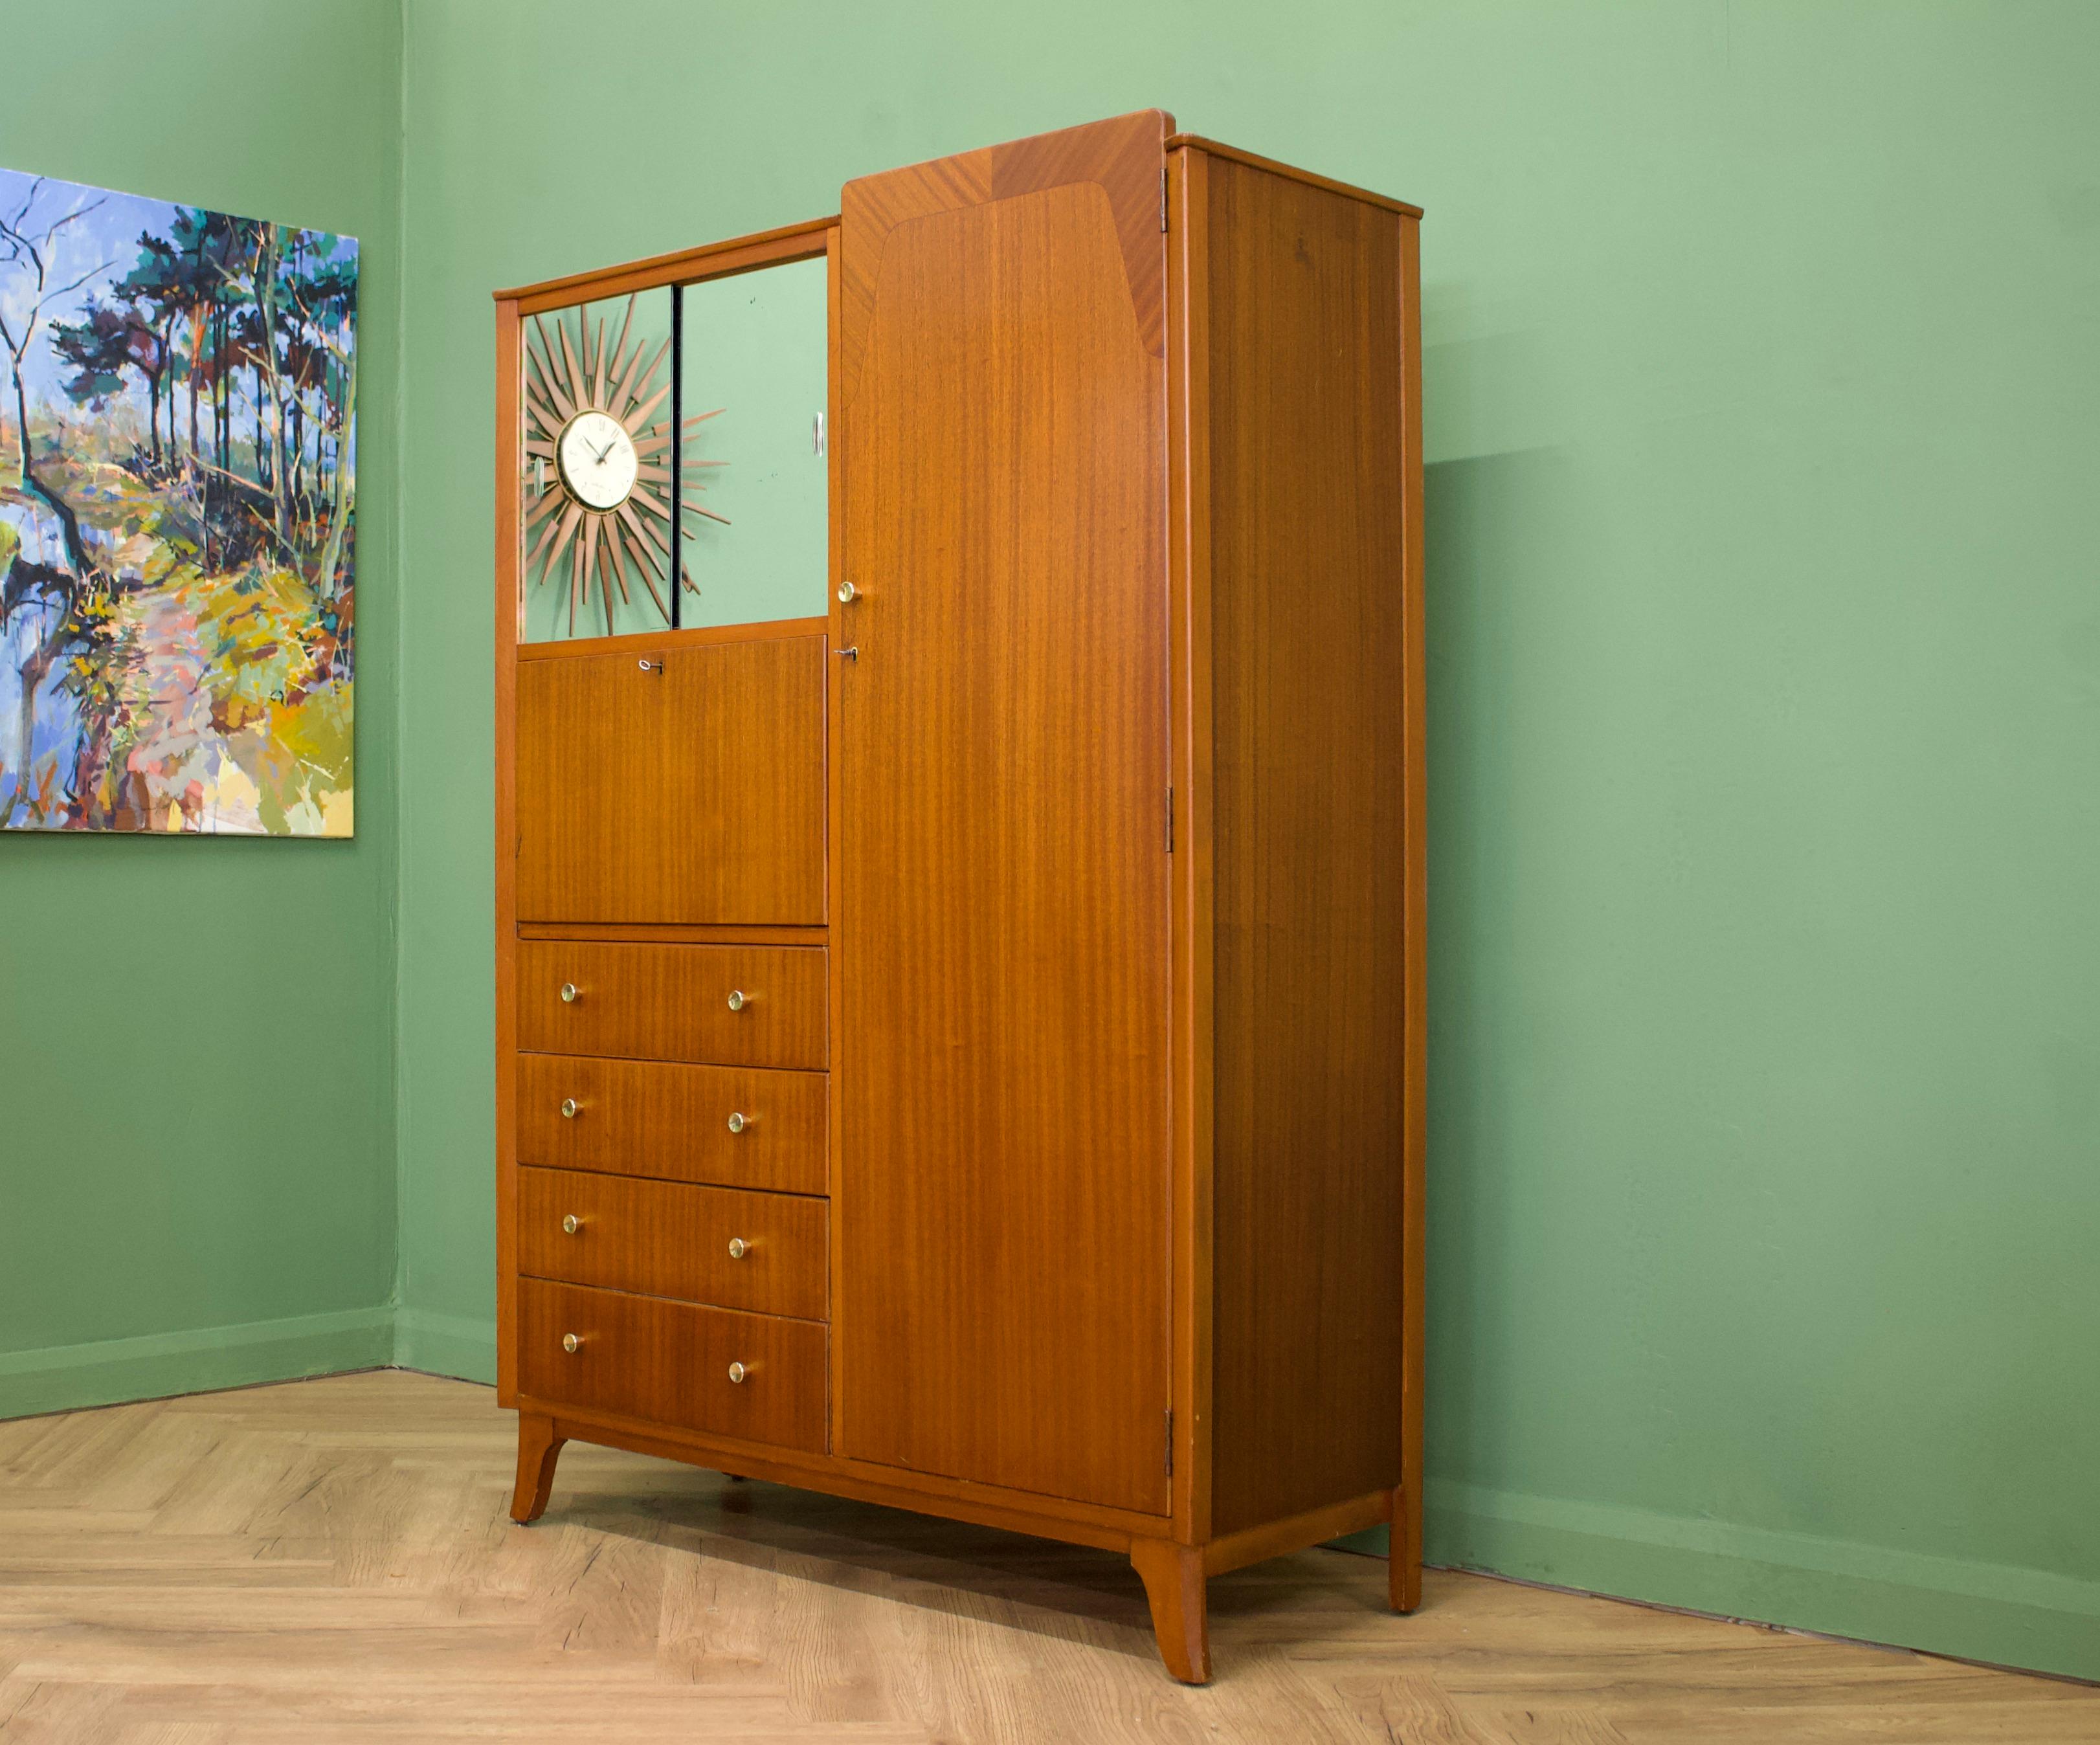 British Mid-Century Compact Wardrobe from Lebus, 1960s